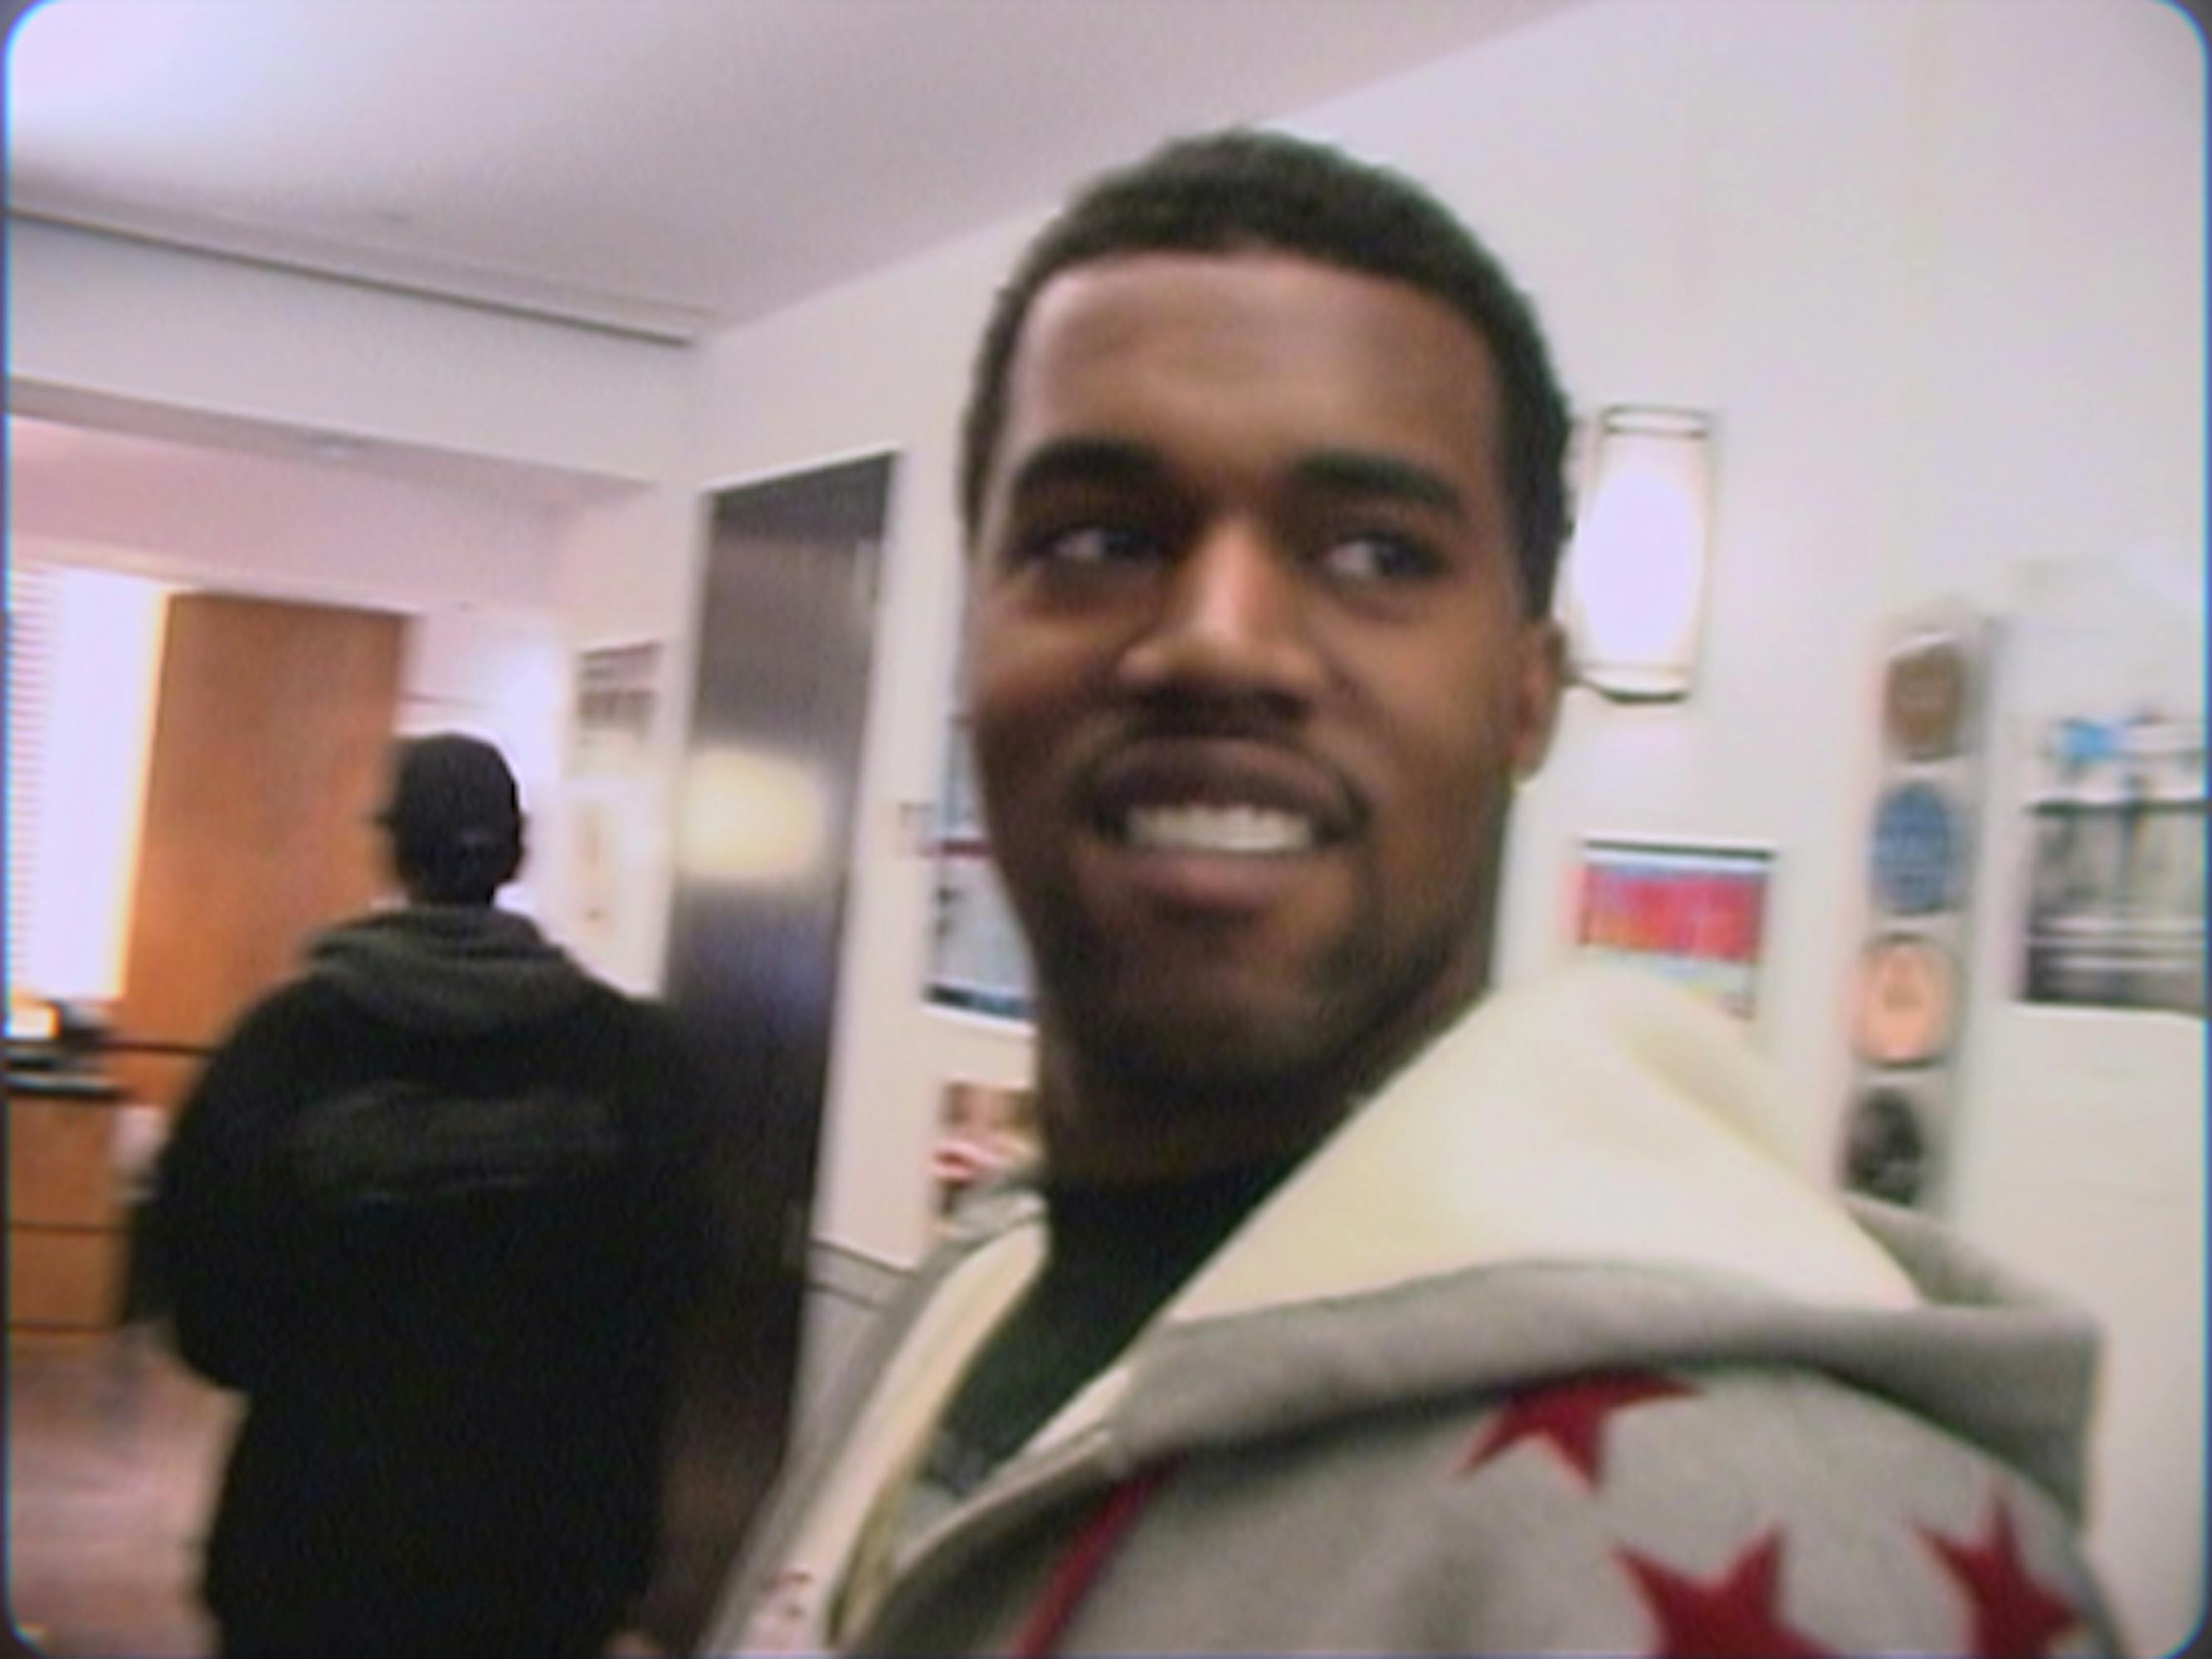 Kanye West wears a grey hoodie with red stars and smiles in this close up picture.